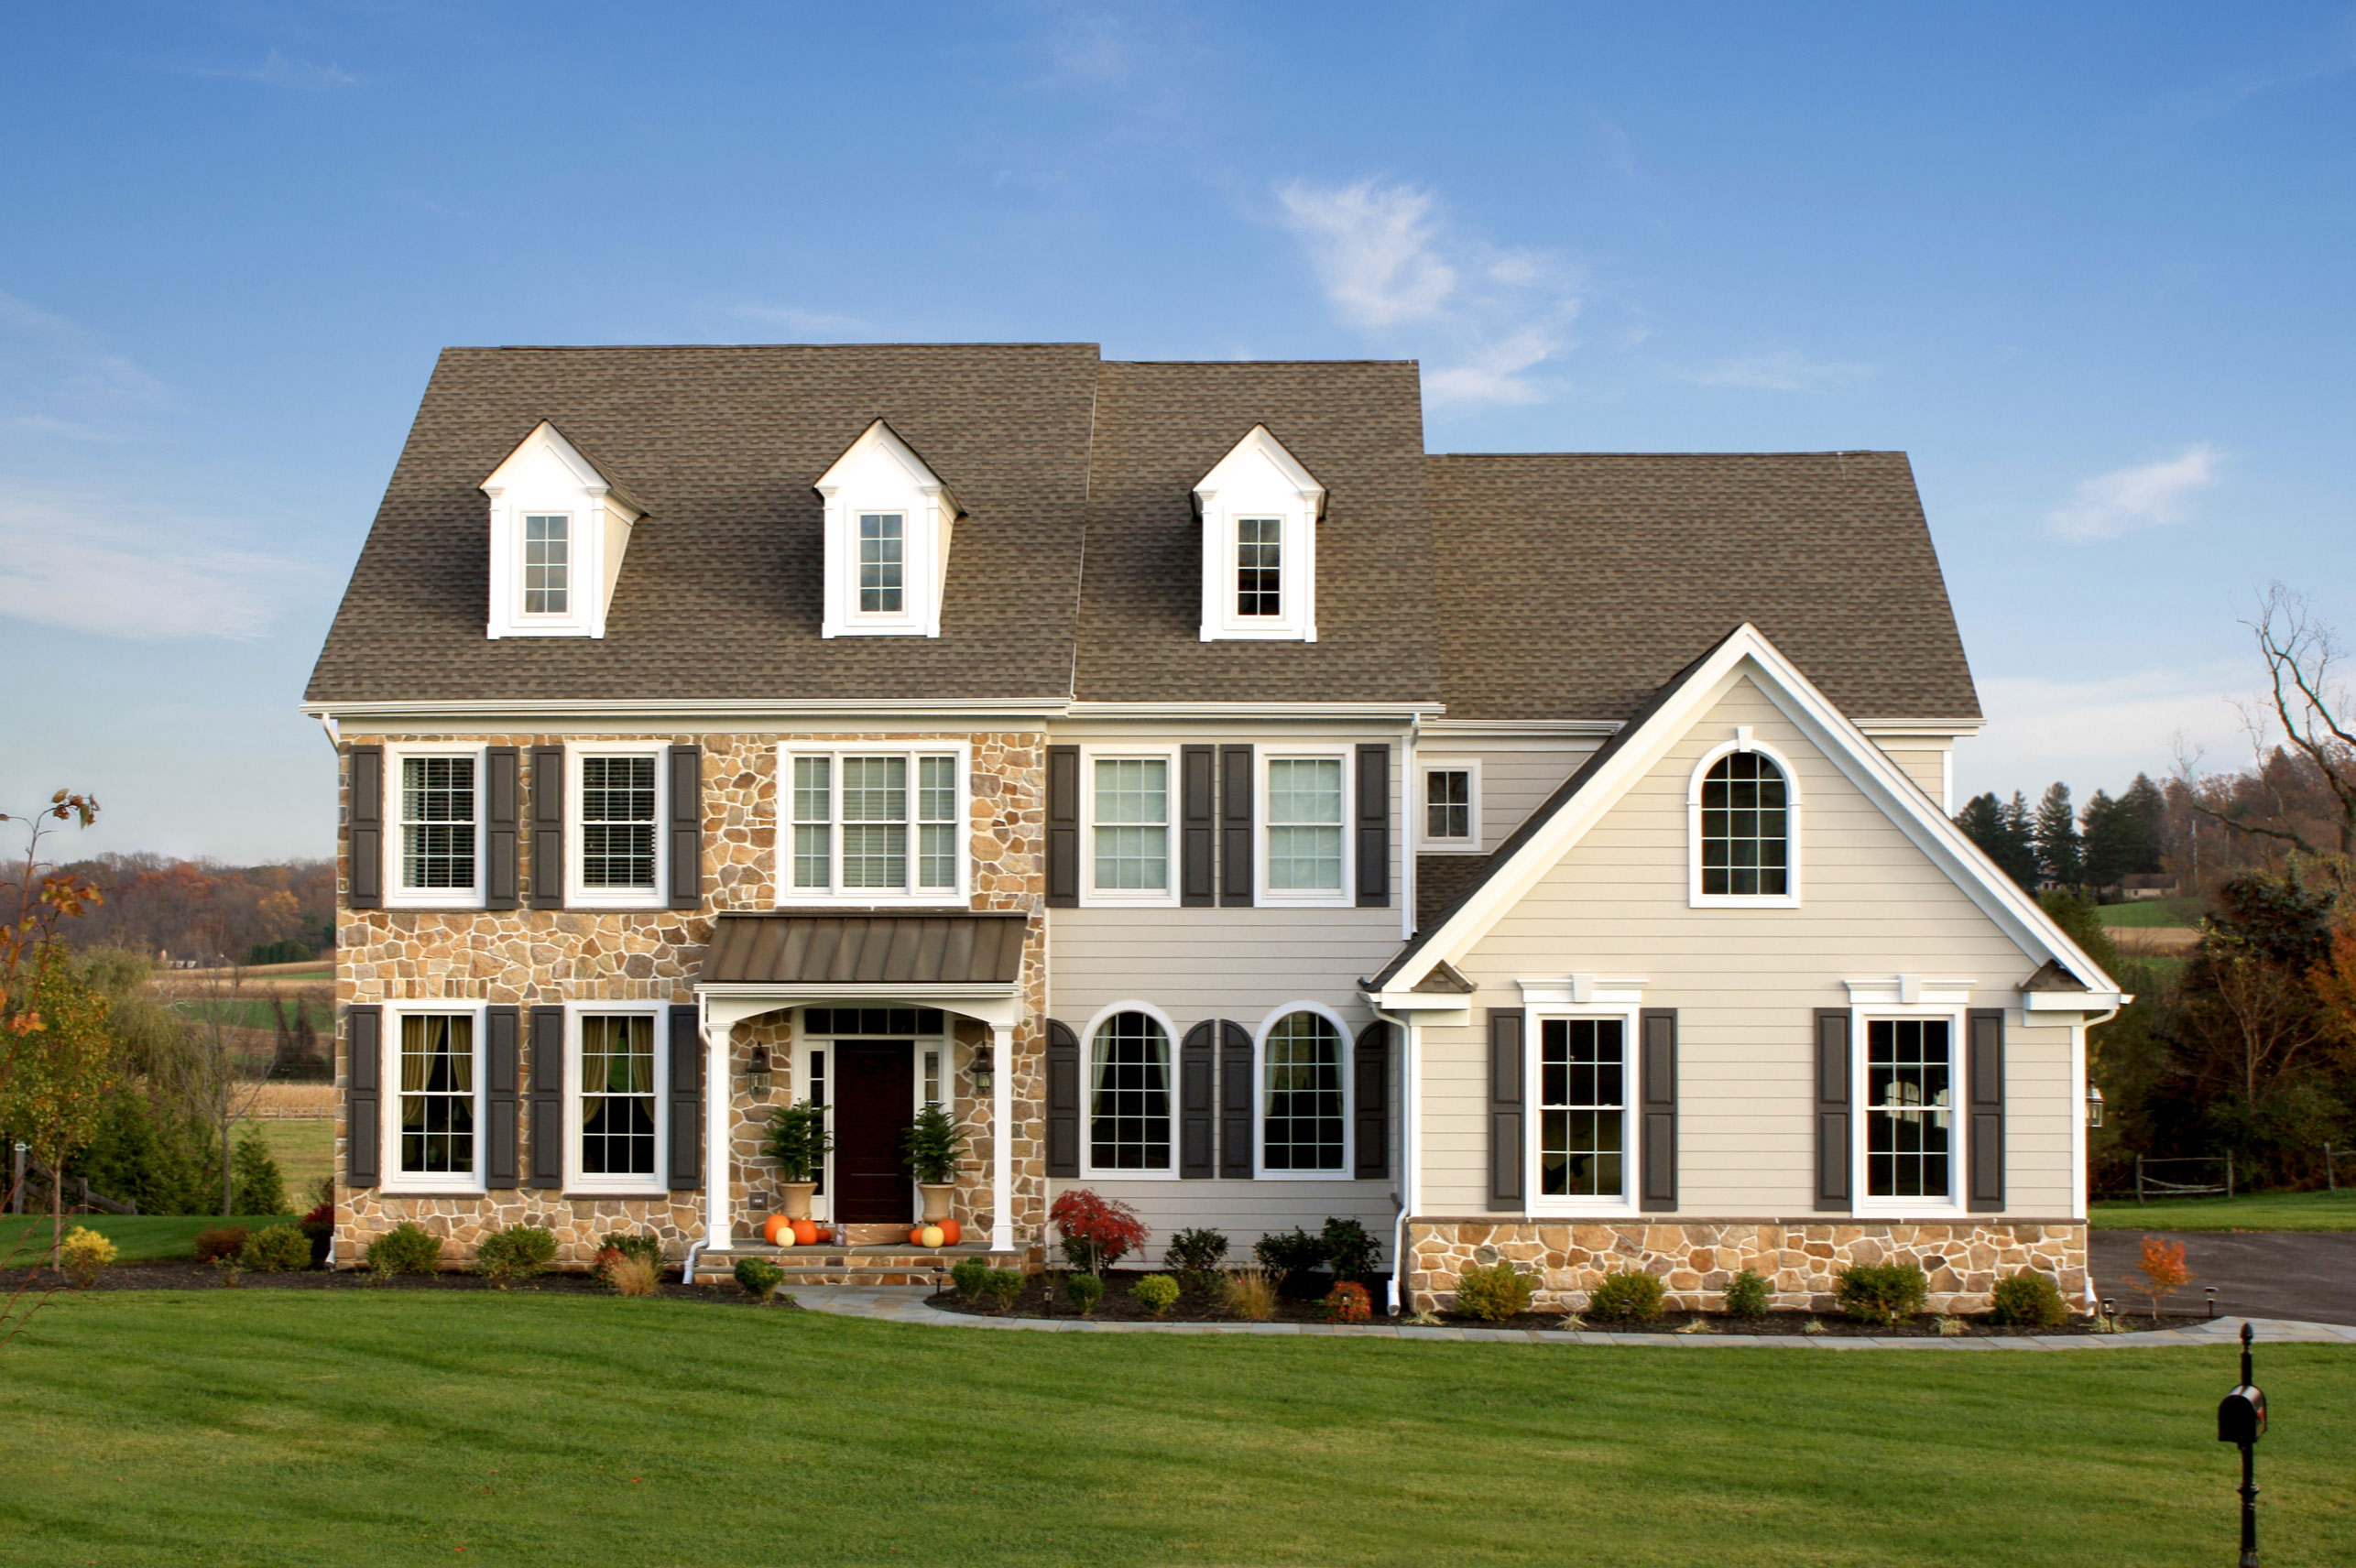 New Homes for Sale in Zionsville PA | Brookshire